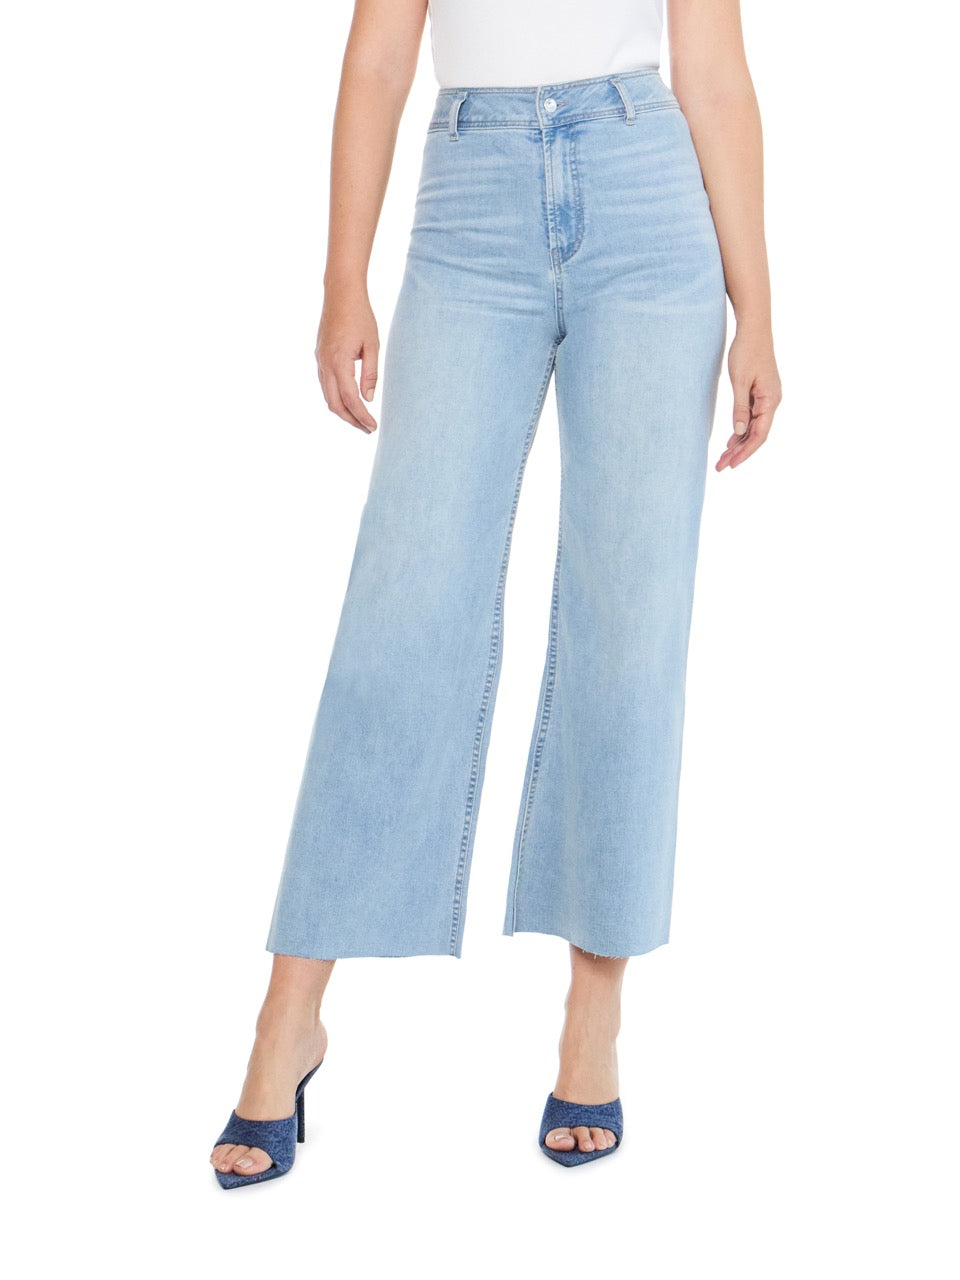 articles of society carine high rise wide leg jeans in light mist-front view